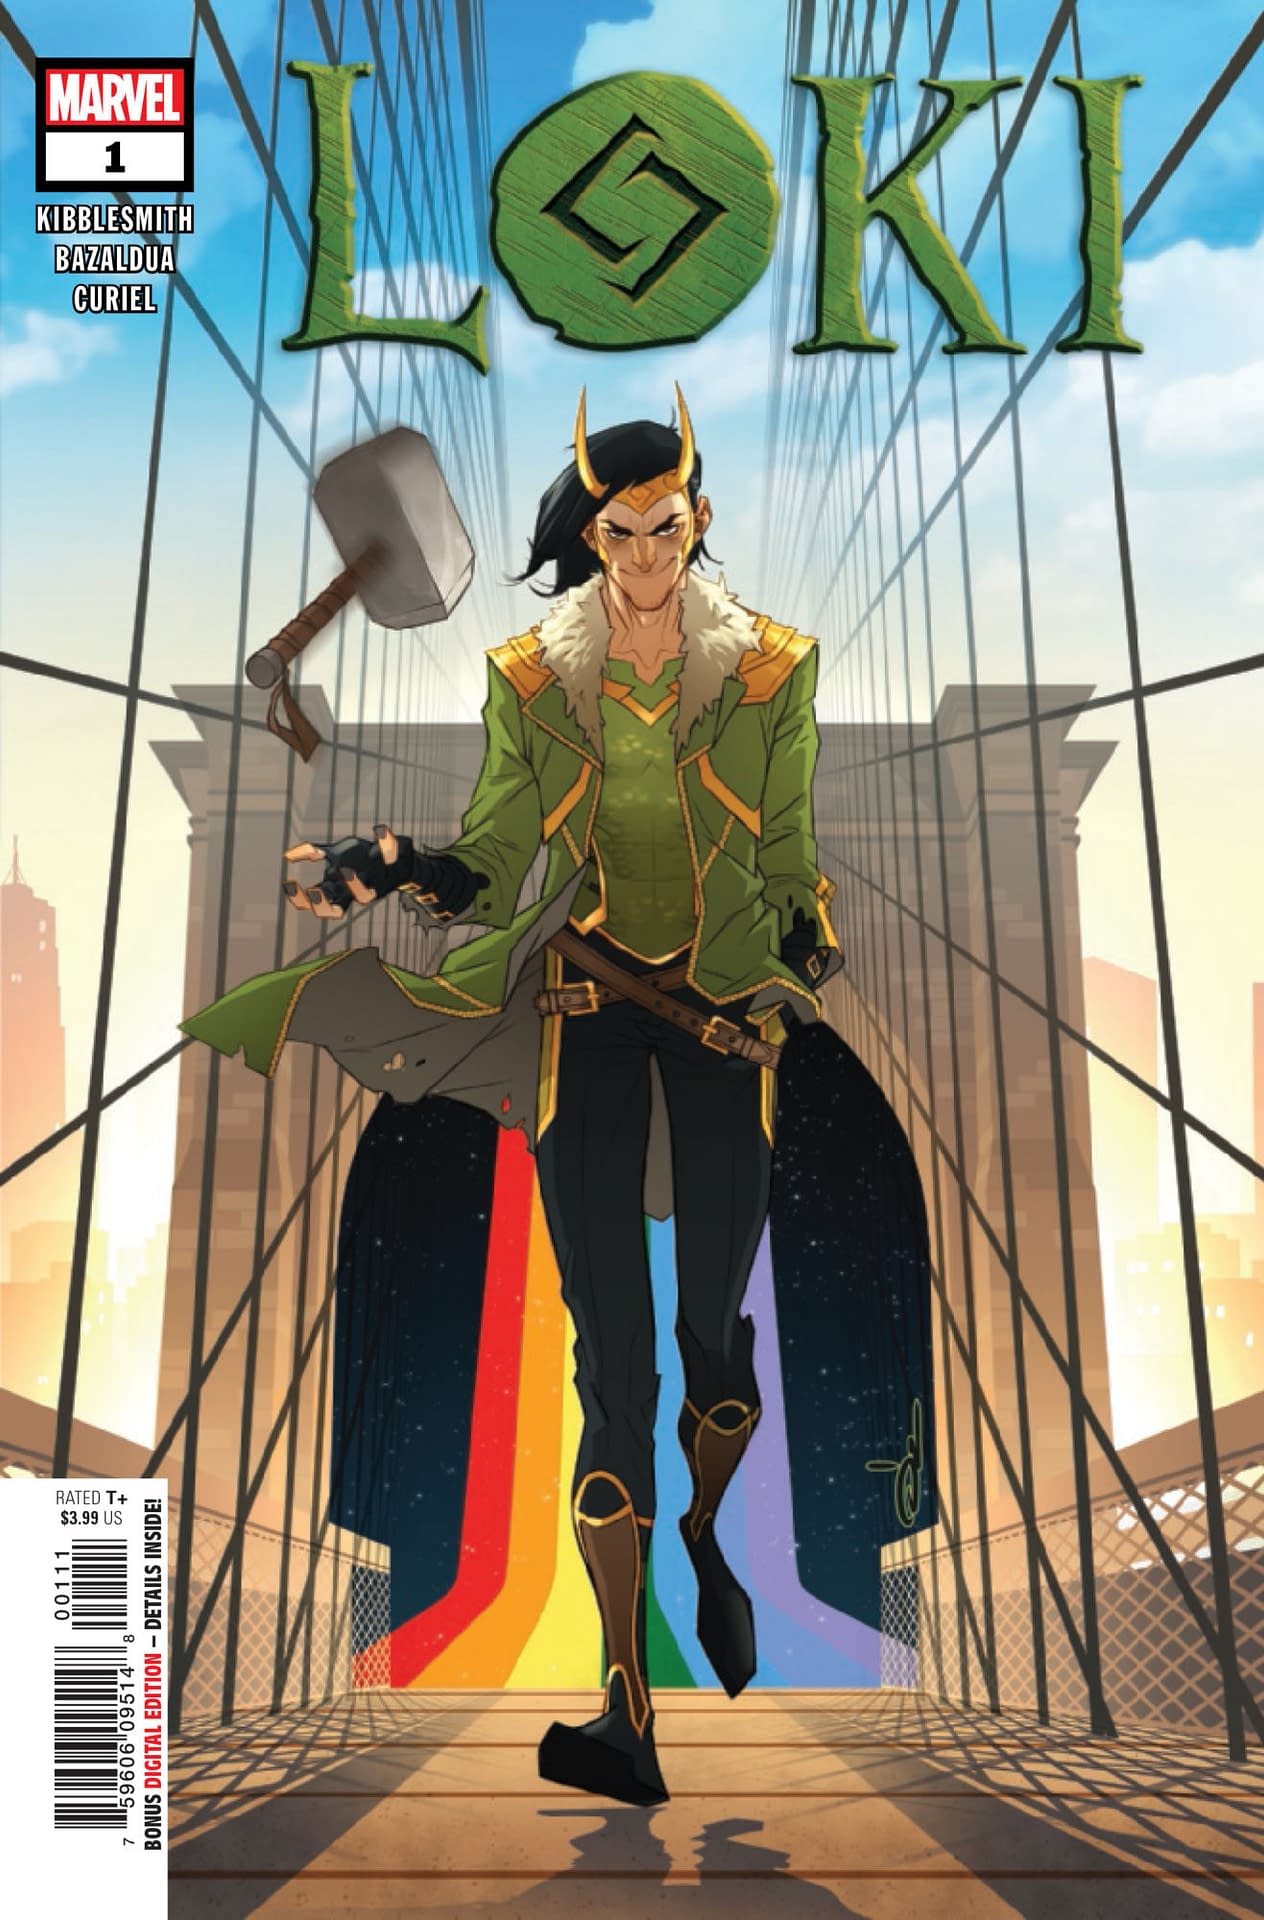 Loki #1: The Post-War-of-the-Realms Status Quo [Preview]